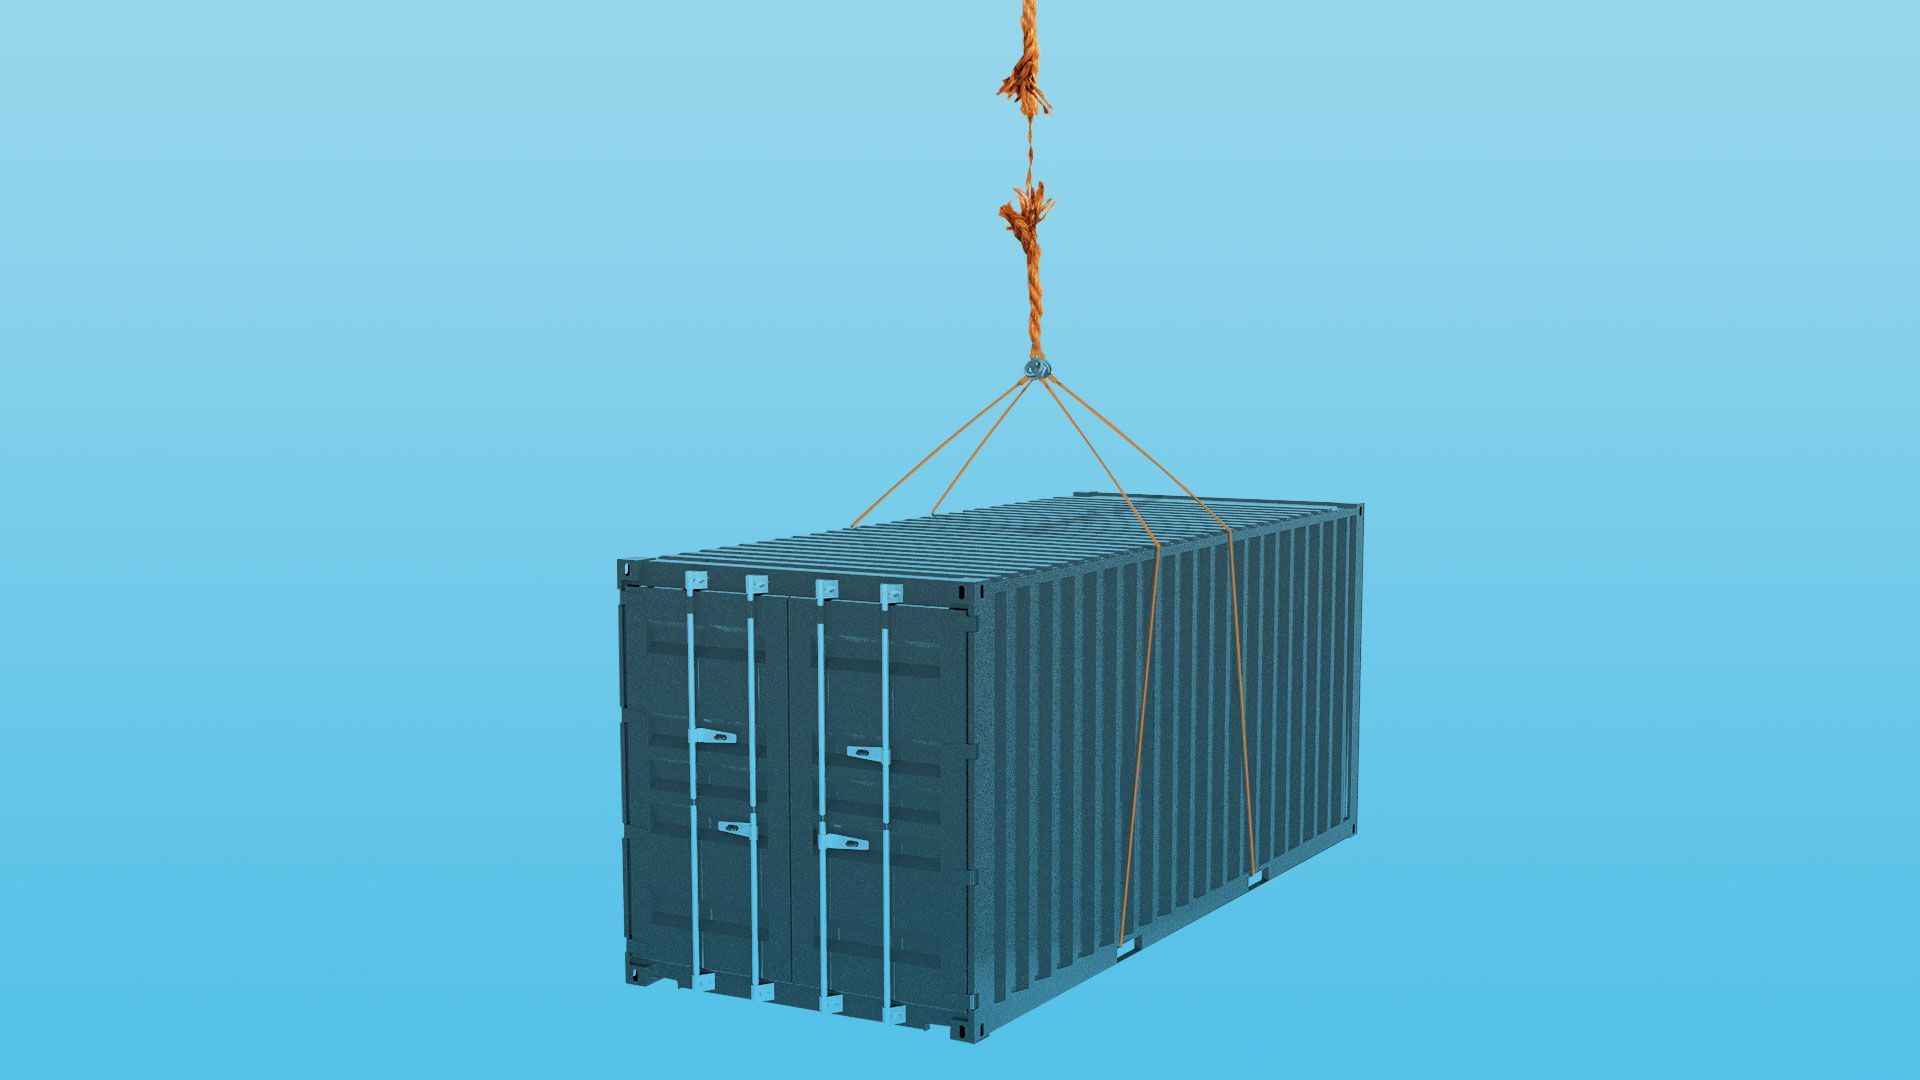 Illustration of a shipment container being held up by a frayed rope. 